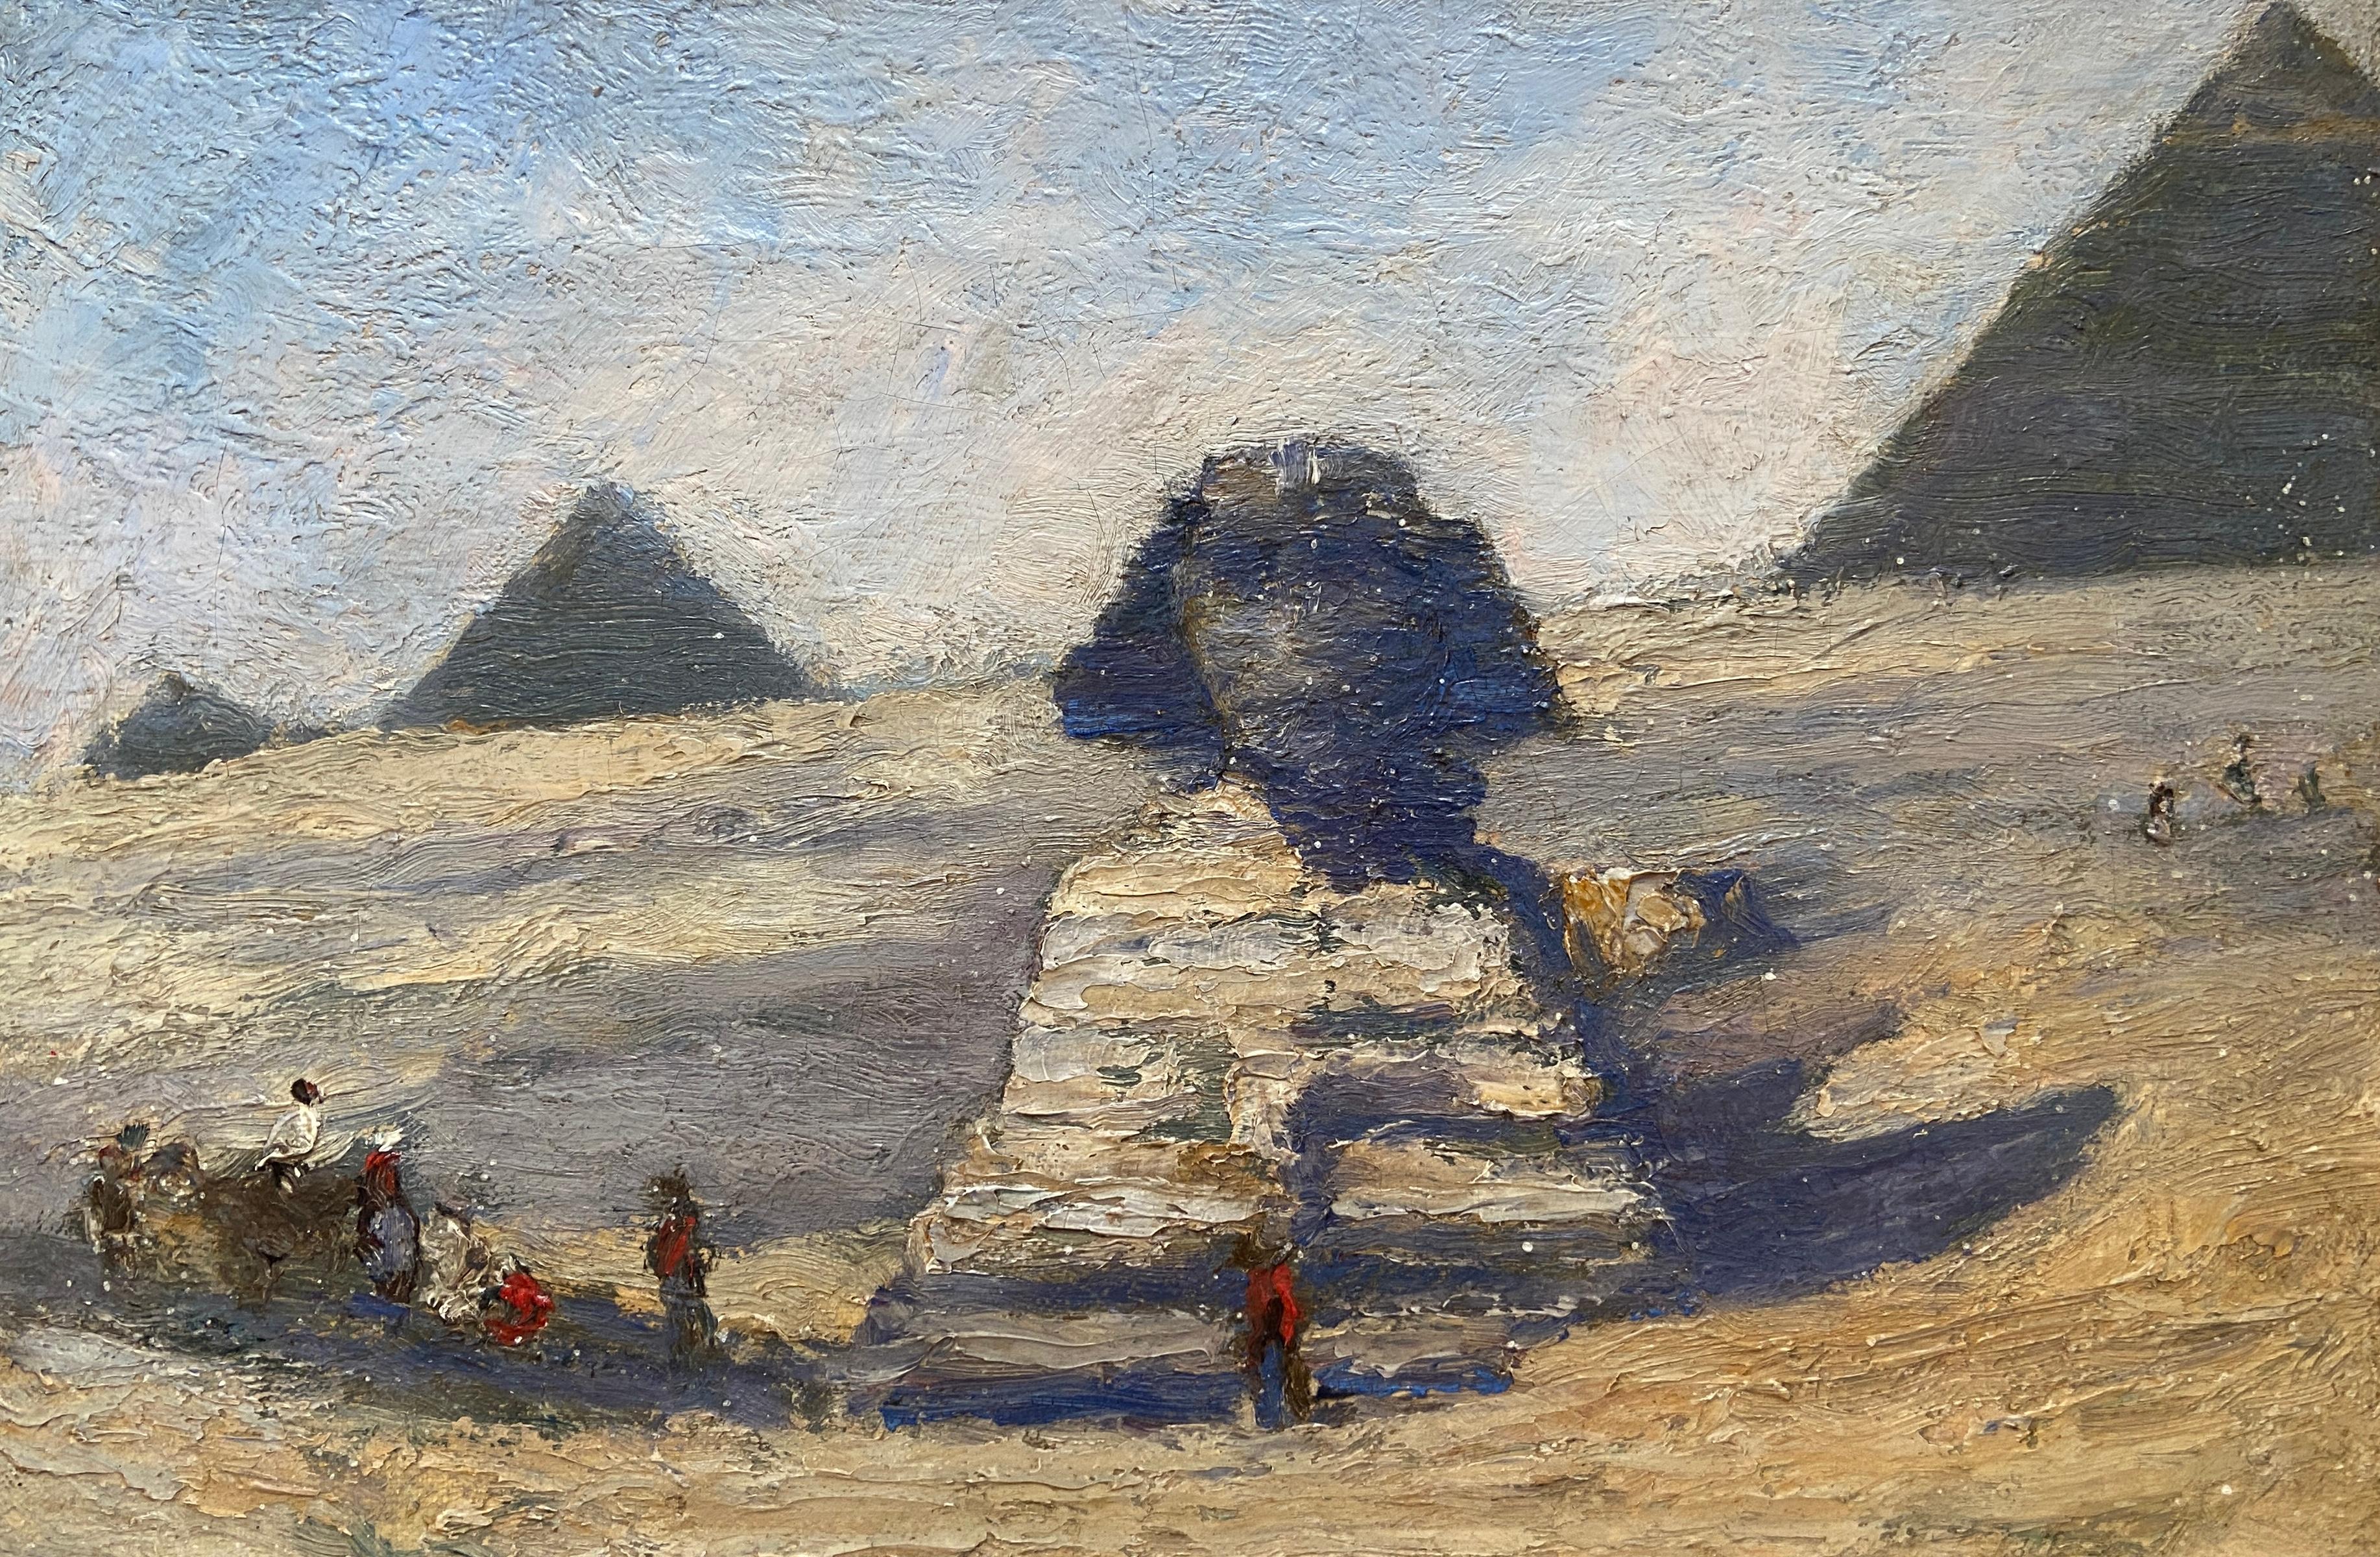 19th century British School Landscape Painting - A View of the Great Sphinx and the Pyramids of Giza, 19th Century British School